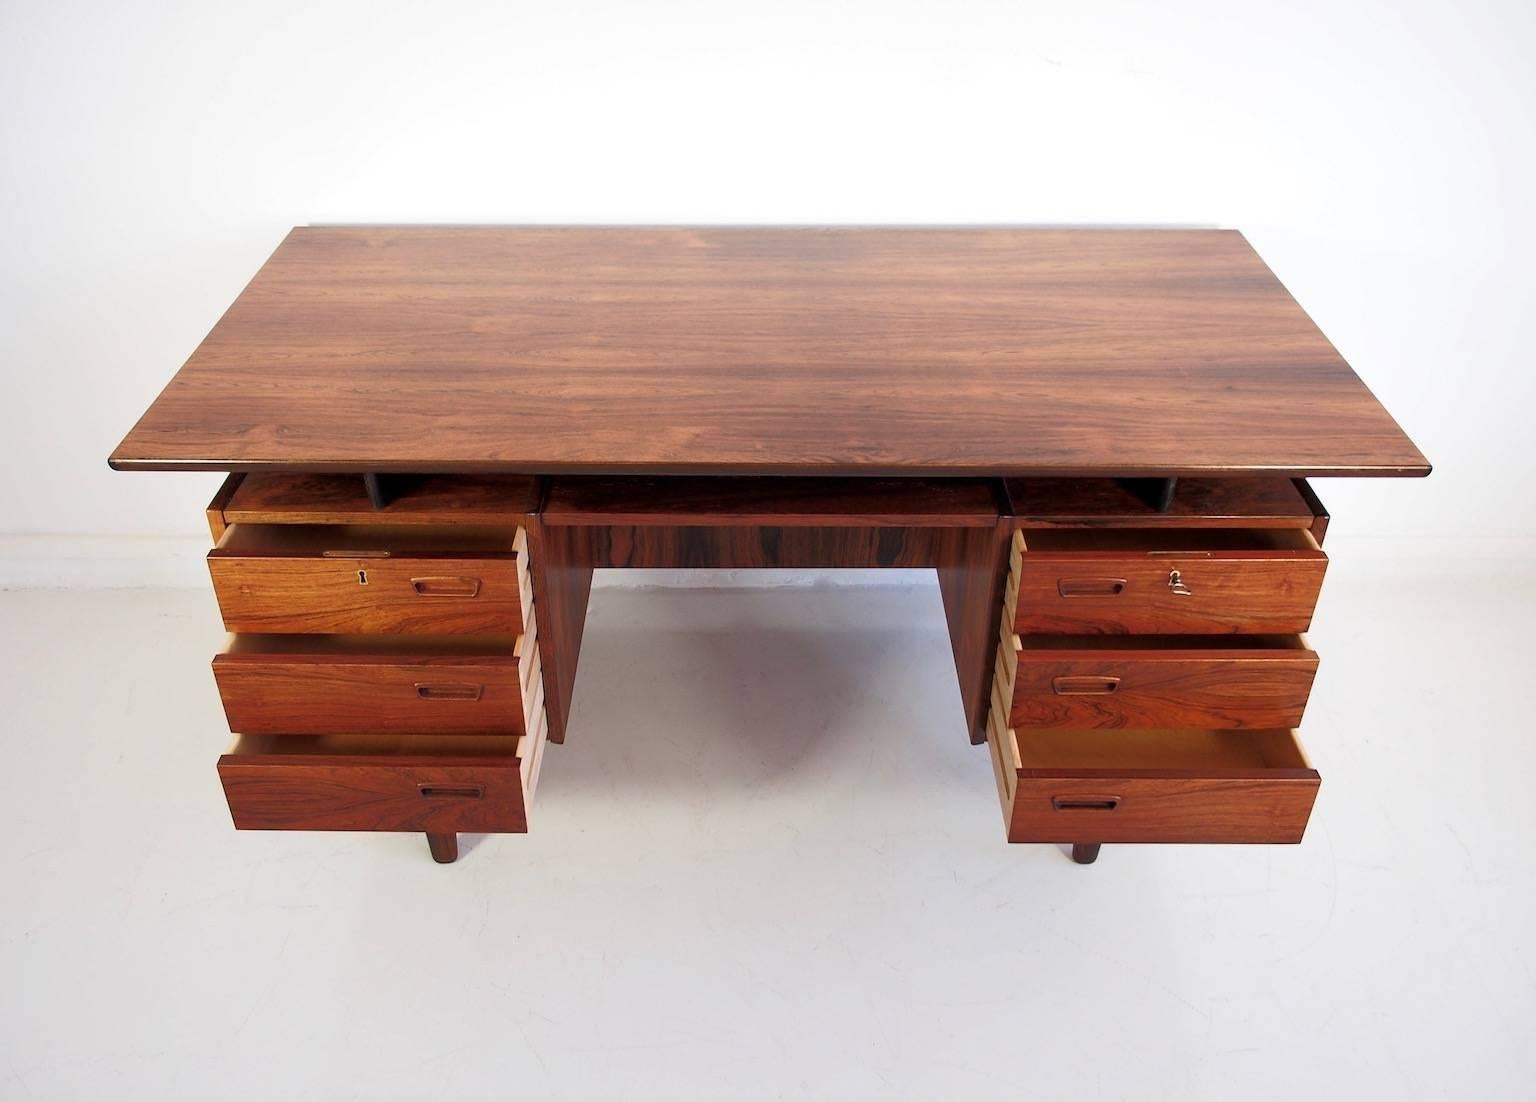 20th Century Danish Rosewood Writing Desk with Drawers and Shelves